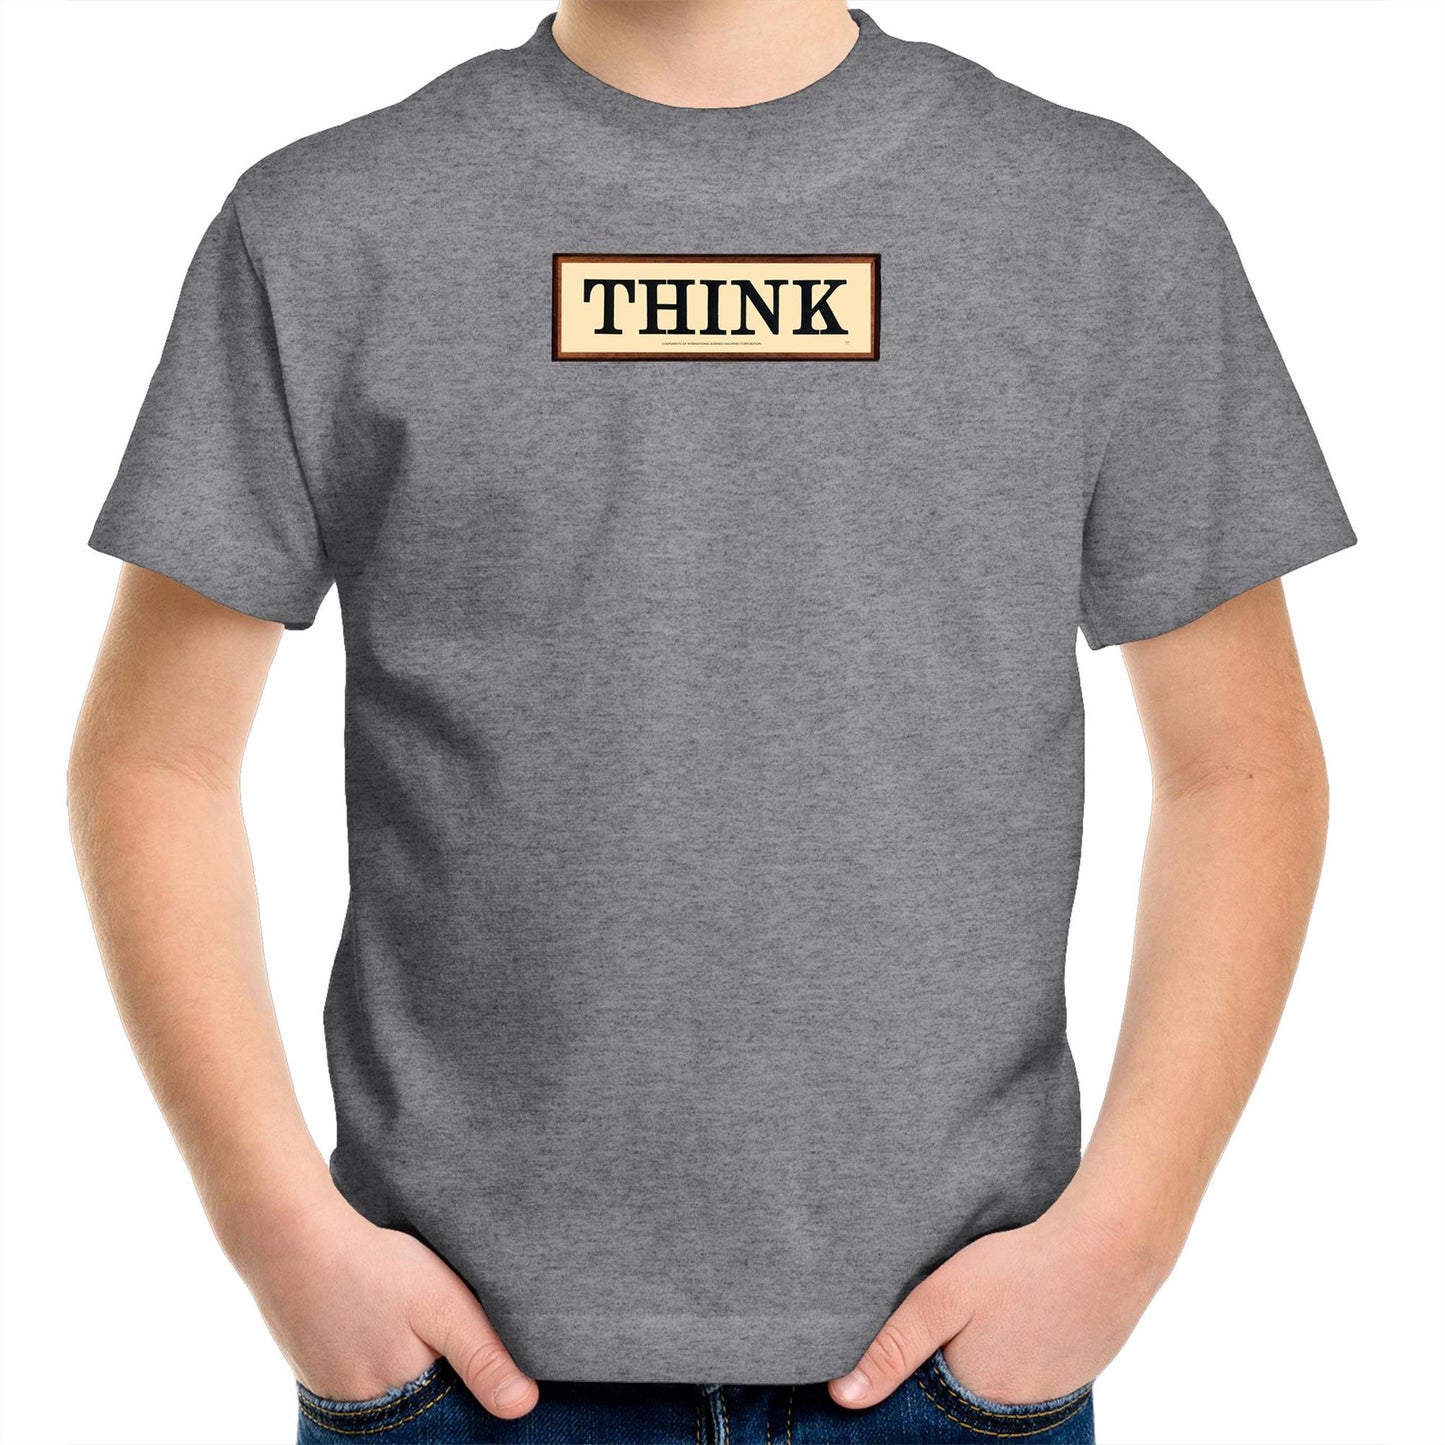 THINK Sign T Shirts for Kids